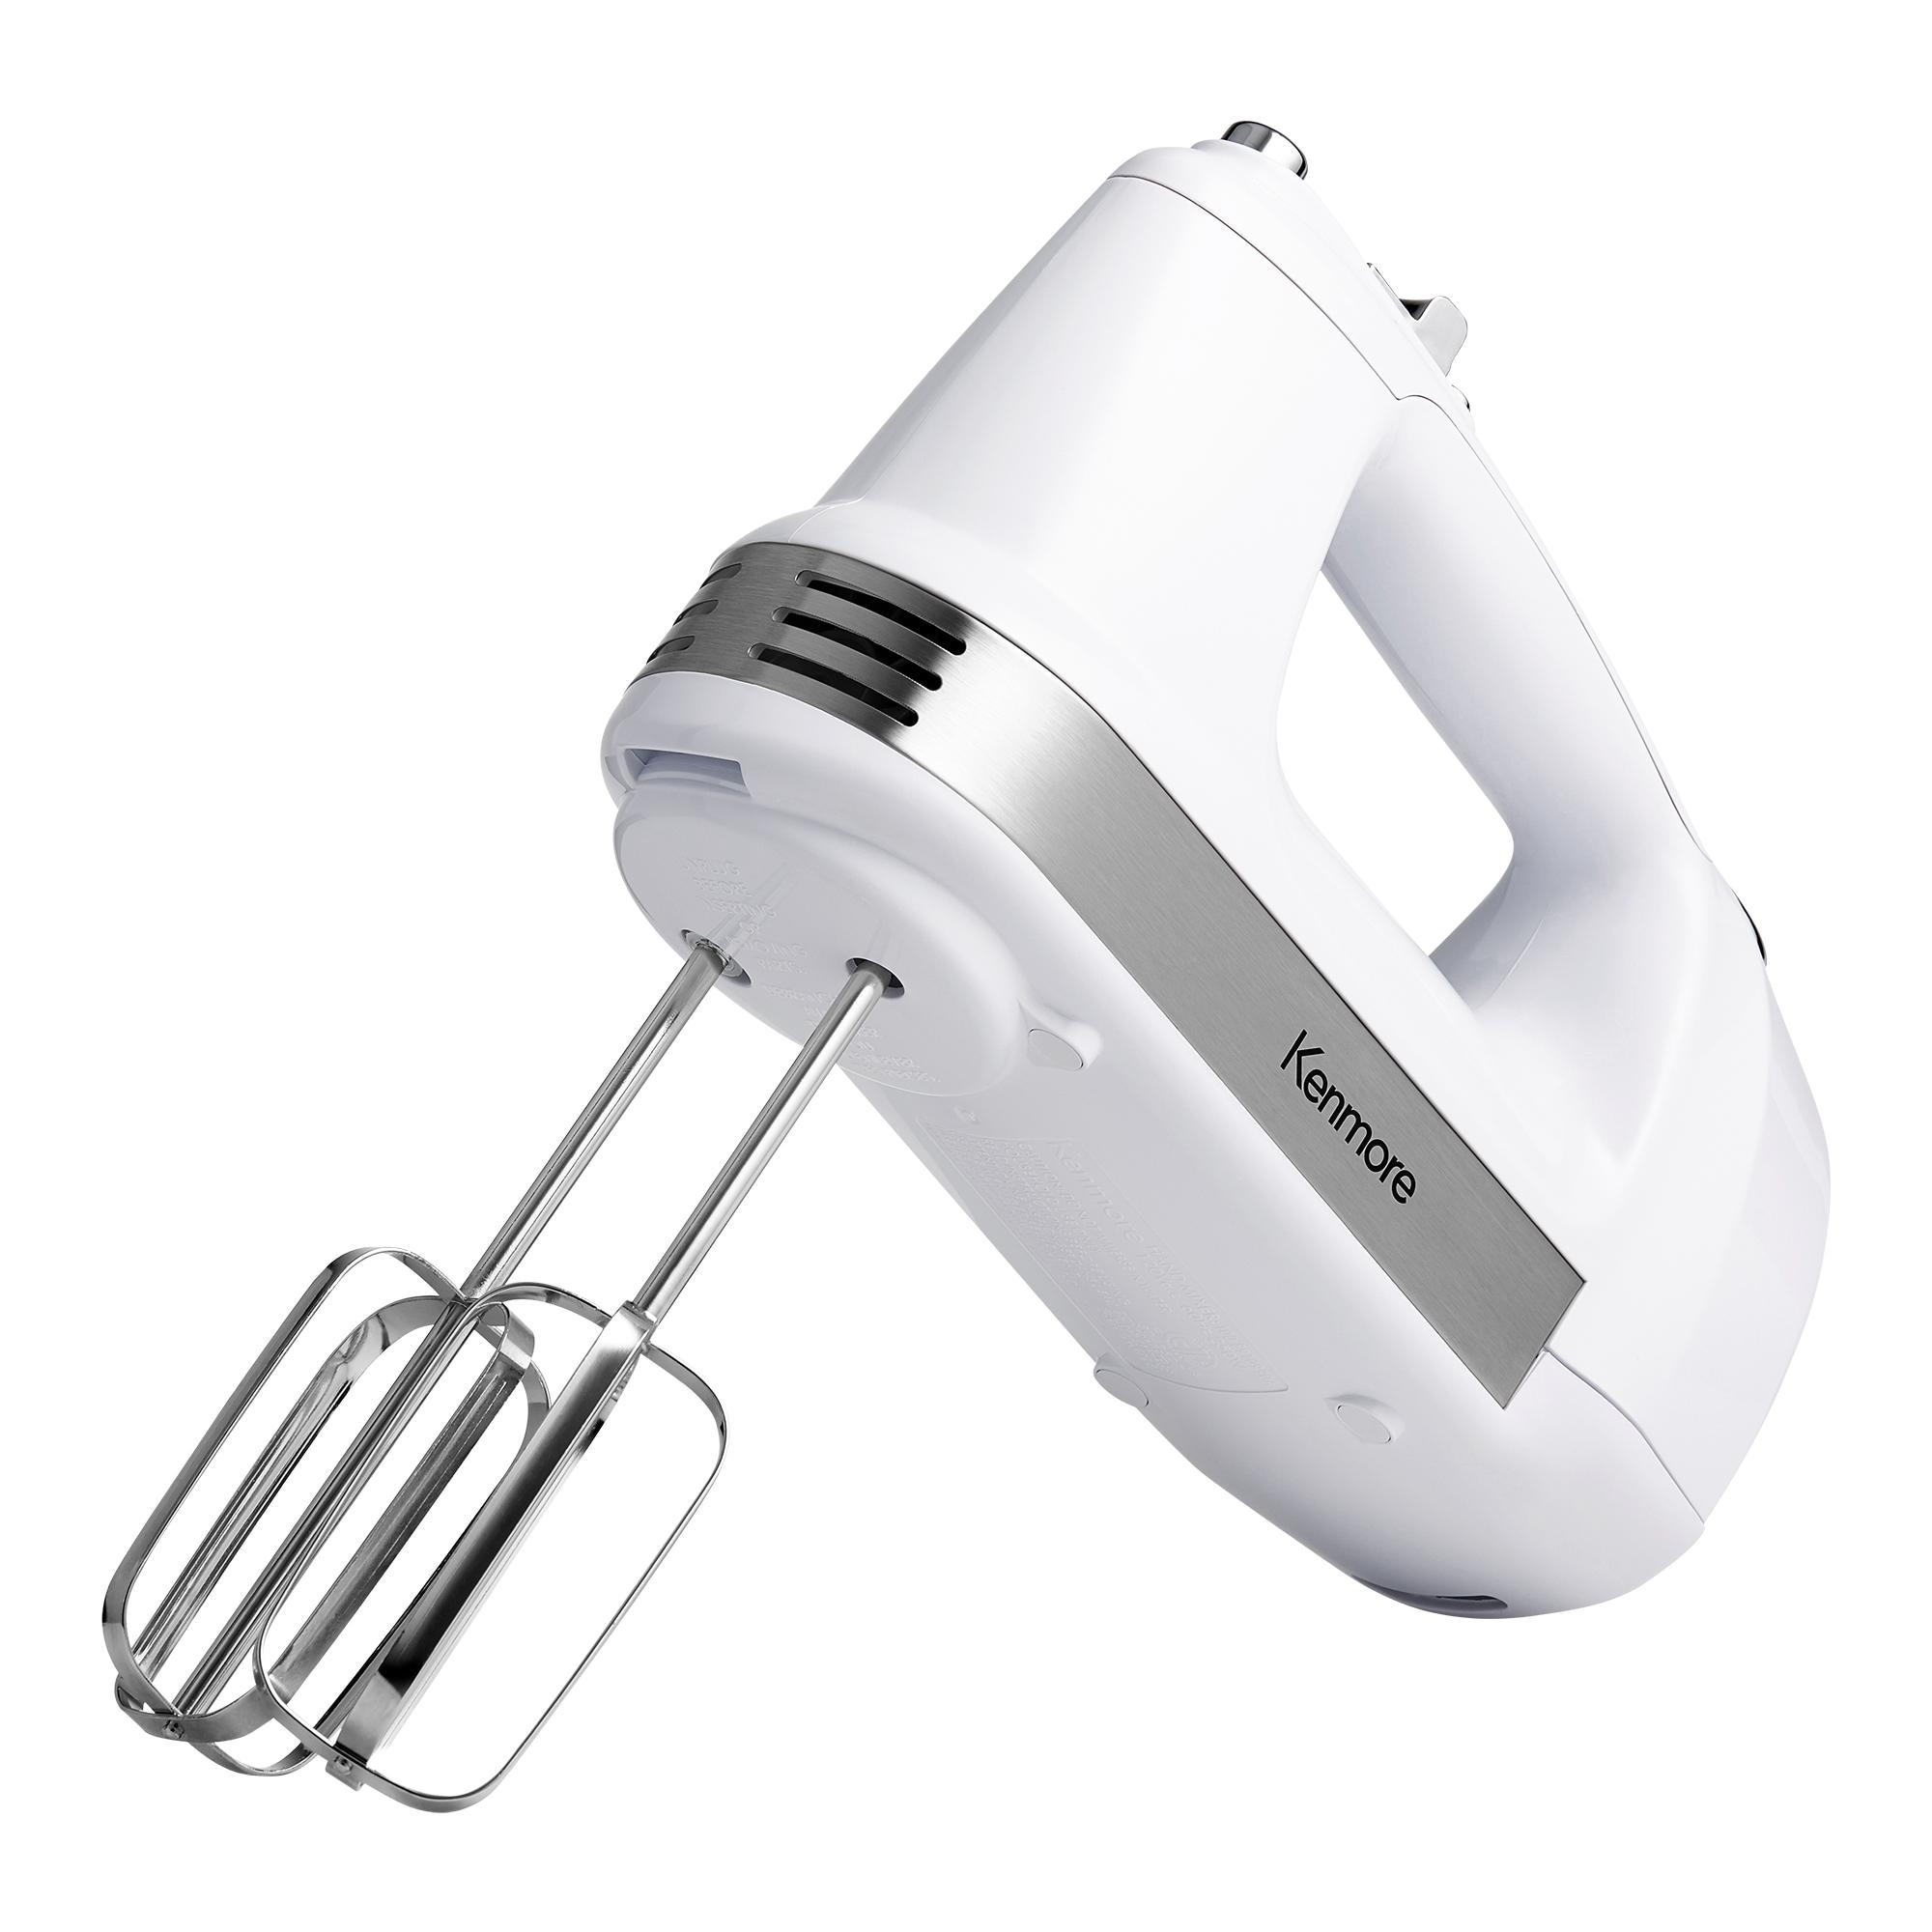 Lightweight Portable Hand Mixer With Dishwasher Safe Beaters for Mixing  Doughs & Batters